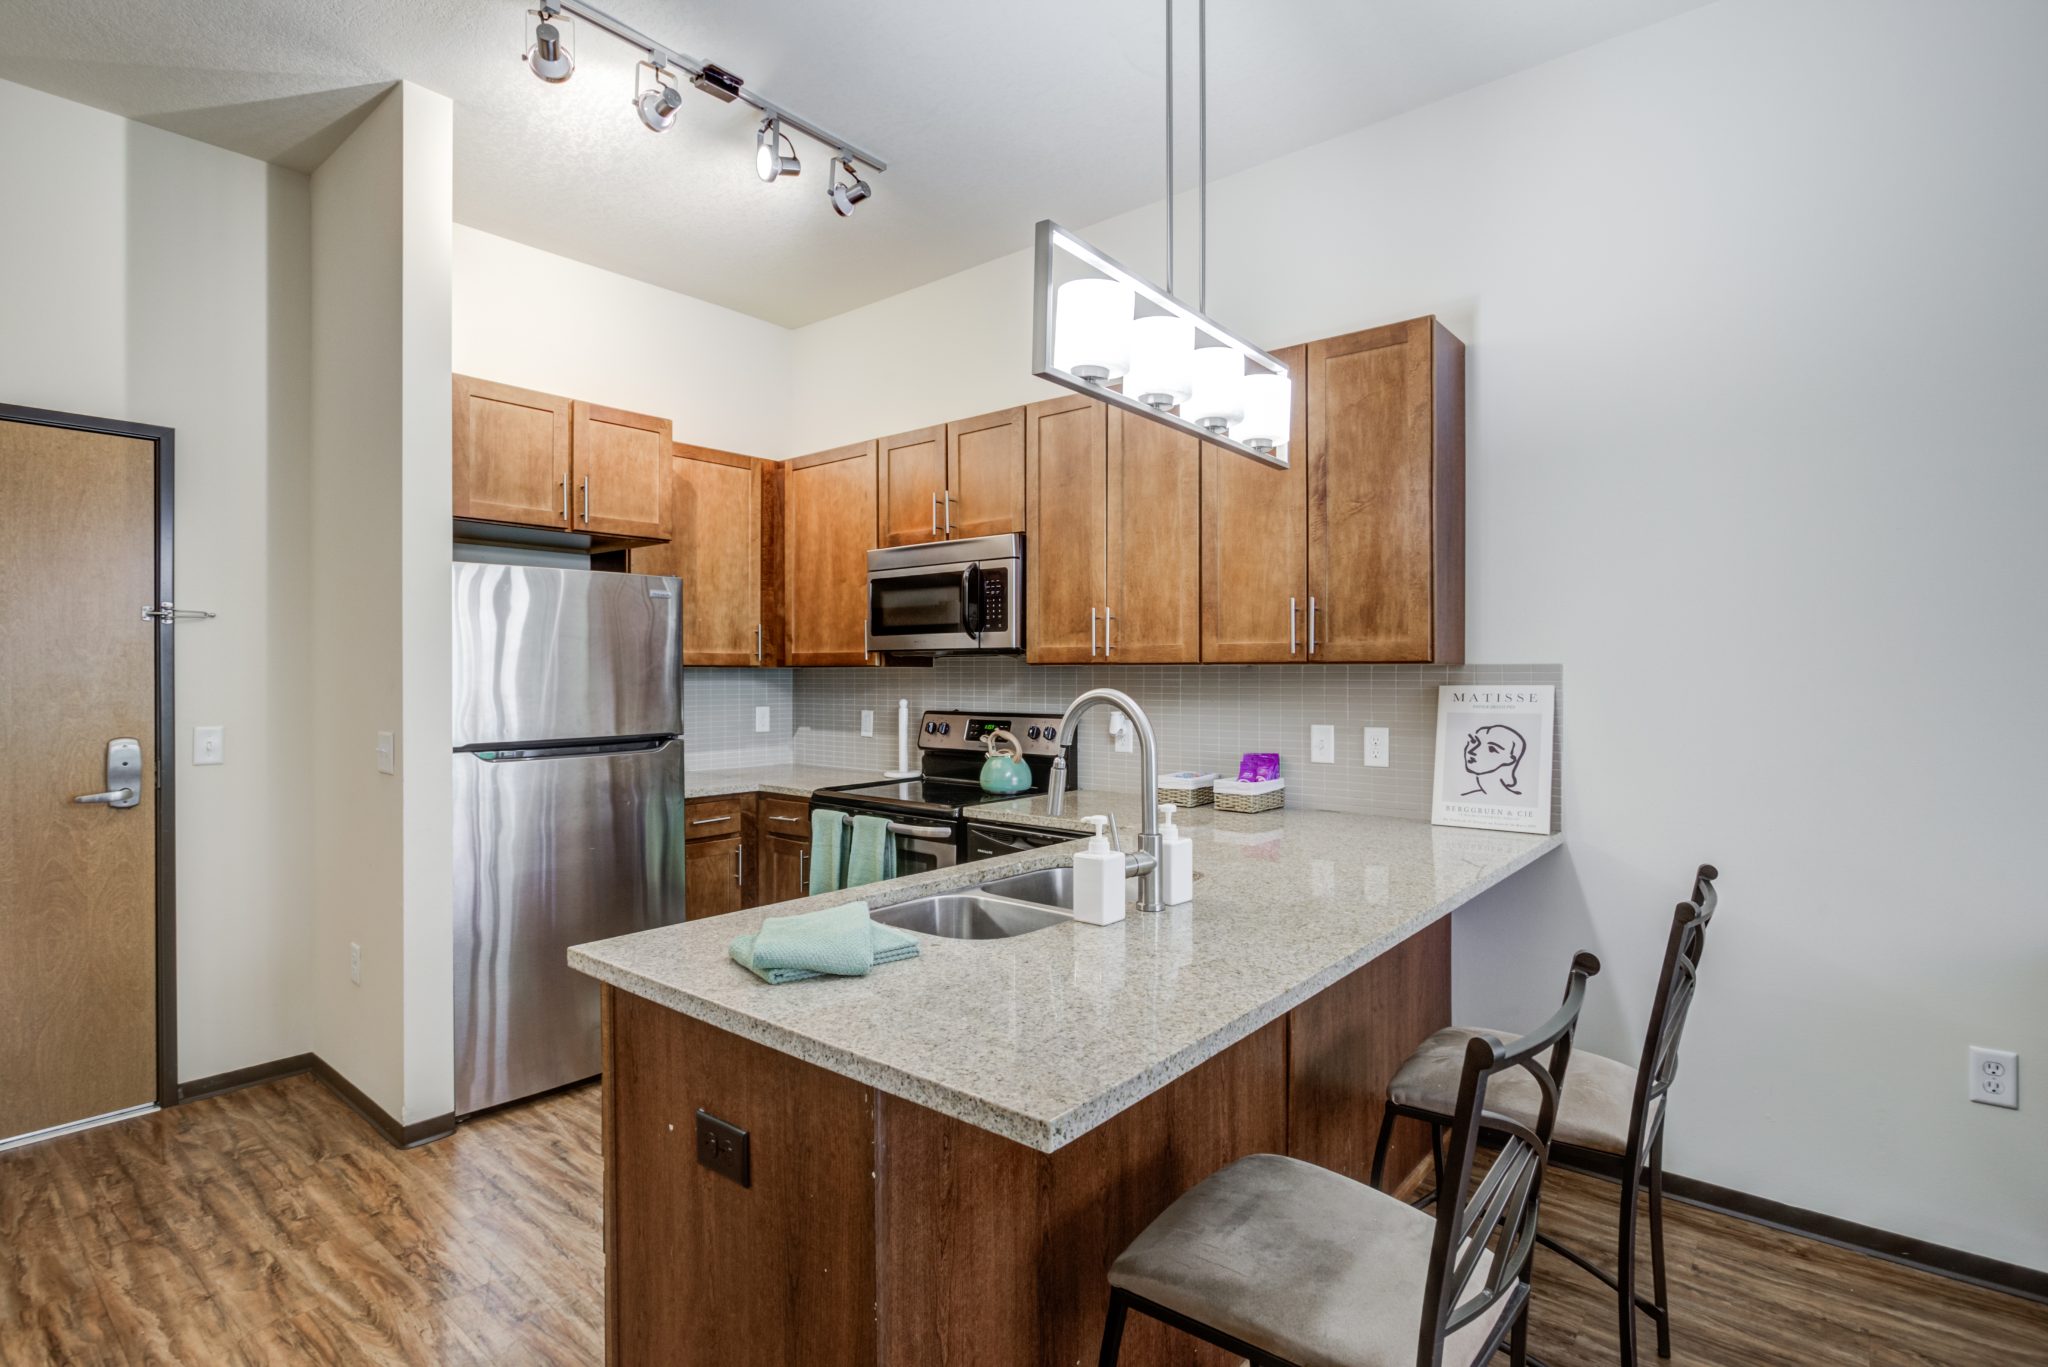 the knoll dinkytown off campus apartments near the university of minnesota kitchen with extra wide kitchen islands bar stool seating granite countertops